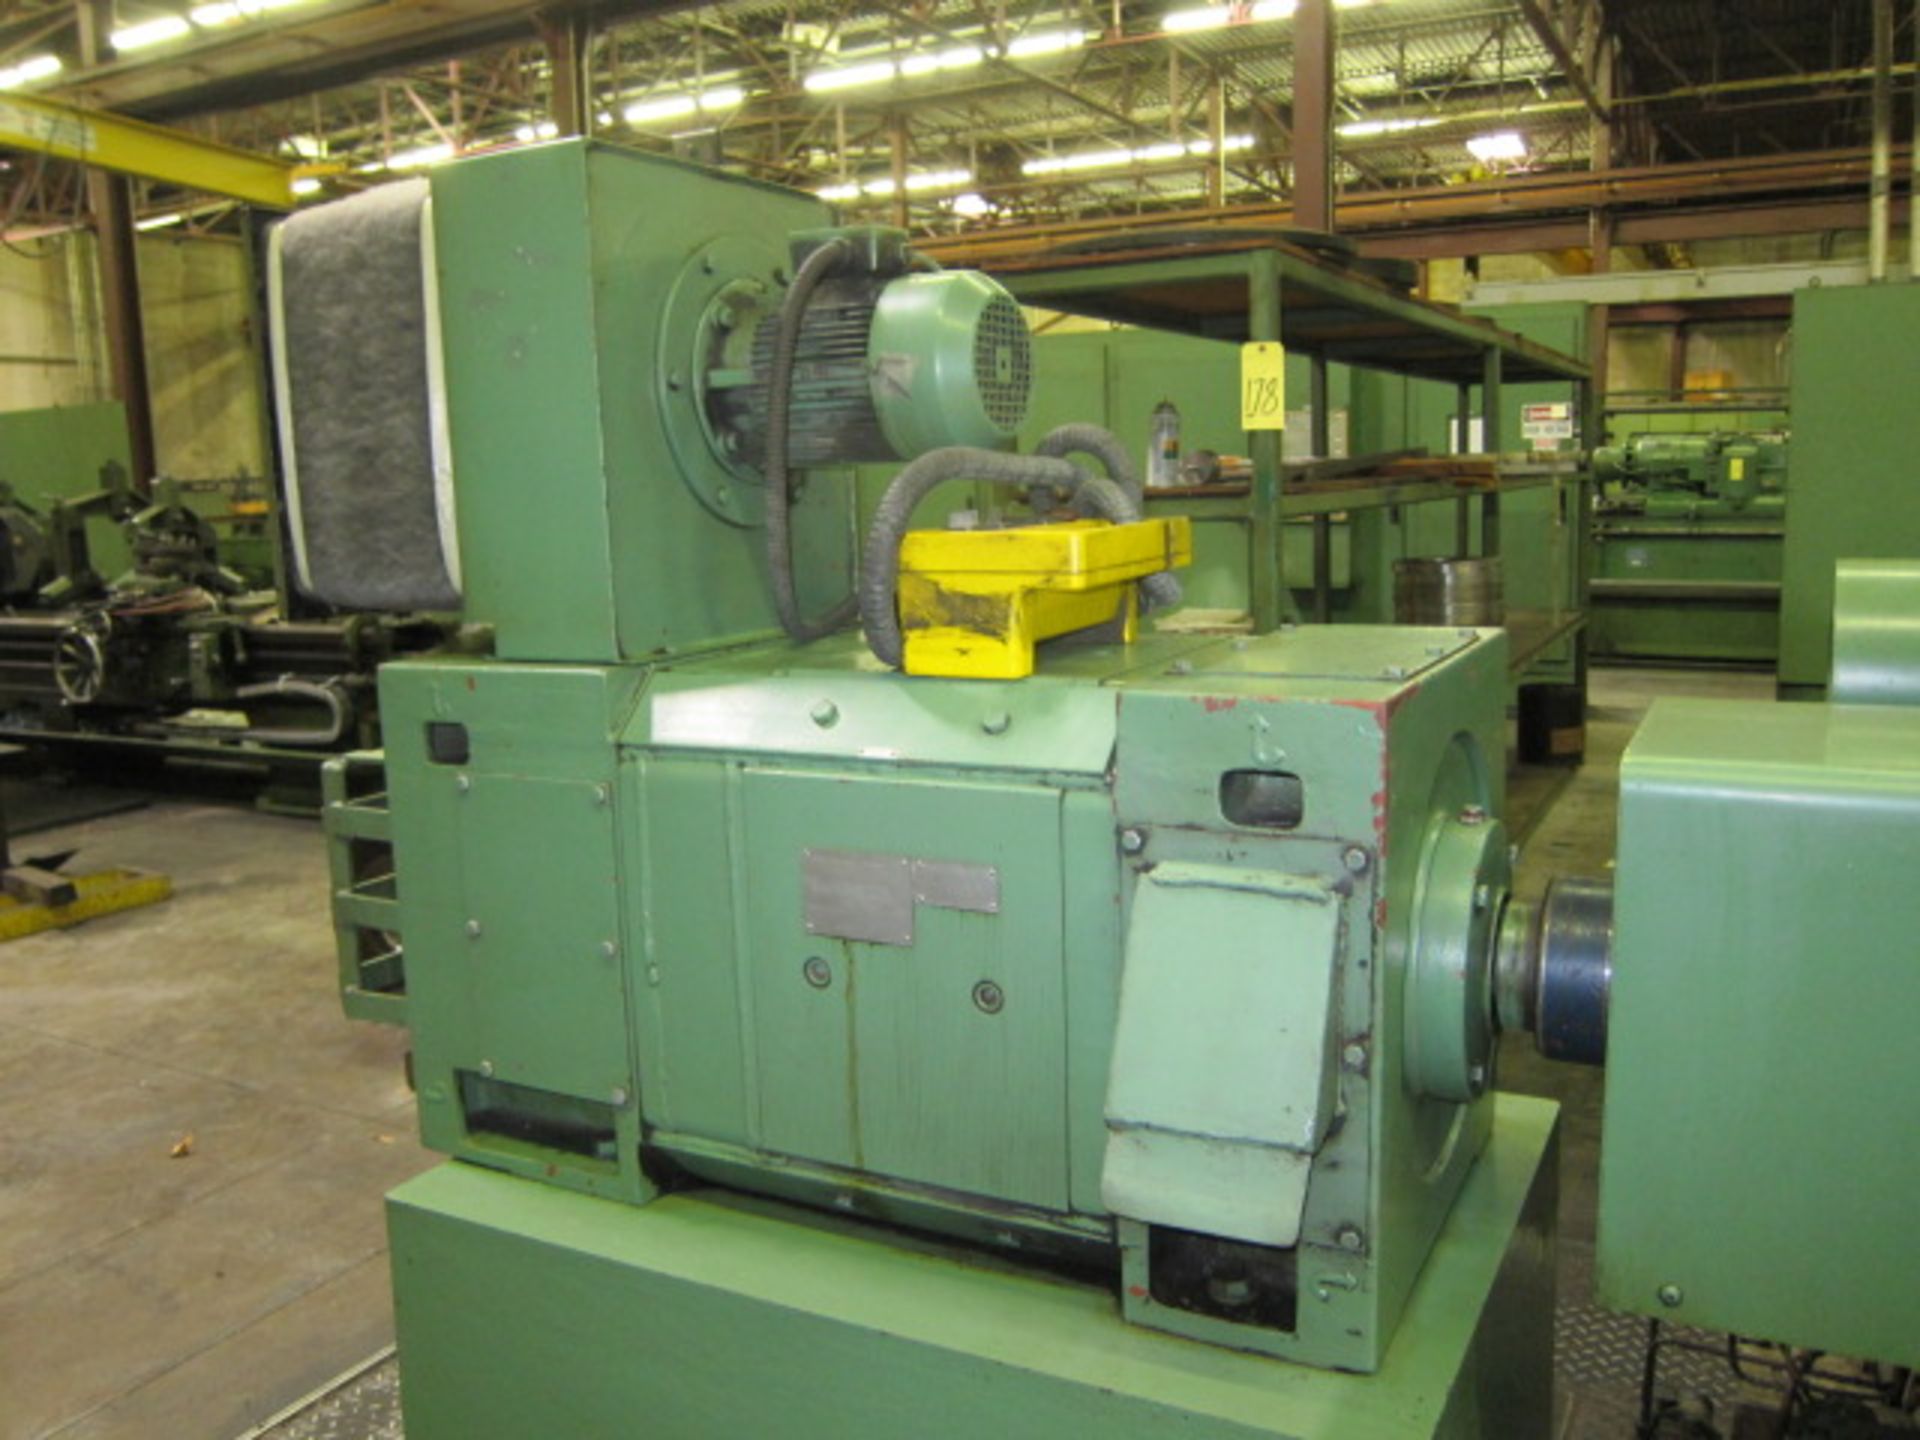 COUNTER ROTATING DEEP HOLE BORING MACHINE, WOHLENBERG MDL. PB2-1000 X 11M, new 1988, 39.37” sw. over - Image 17 of 31